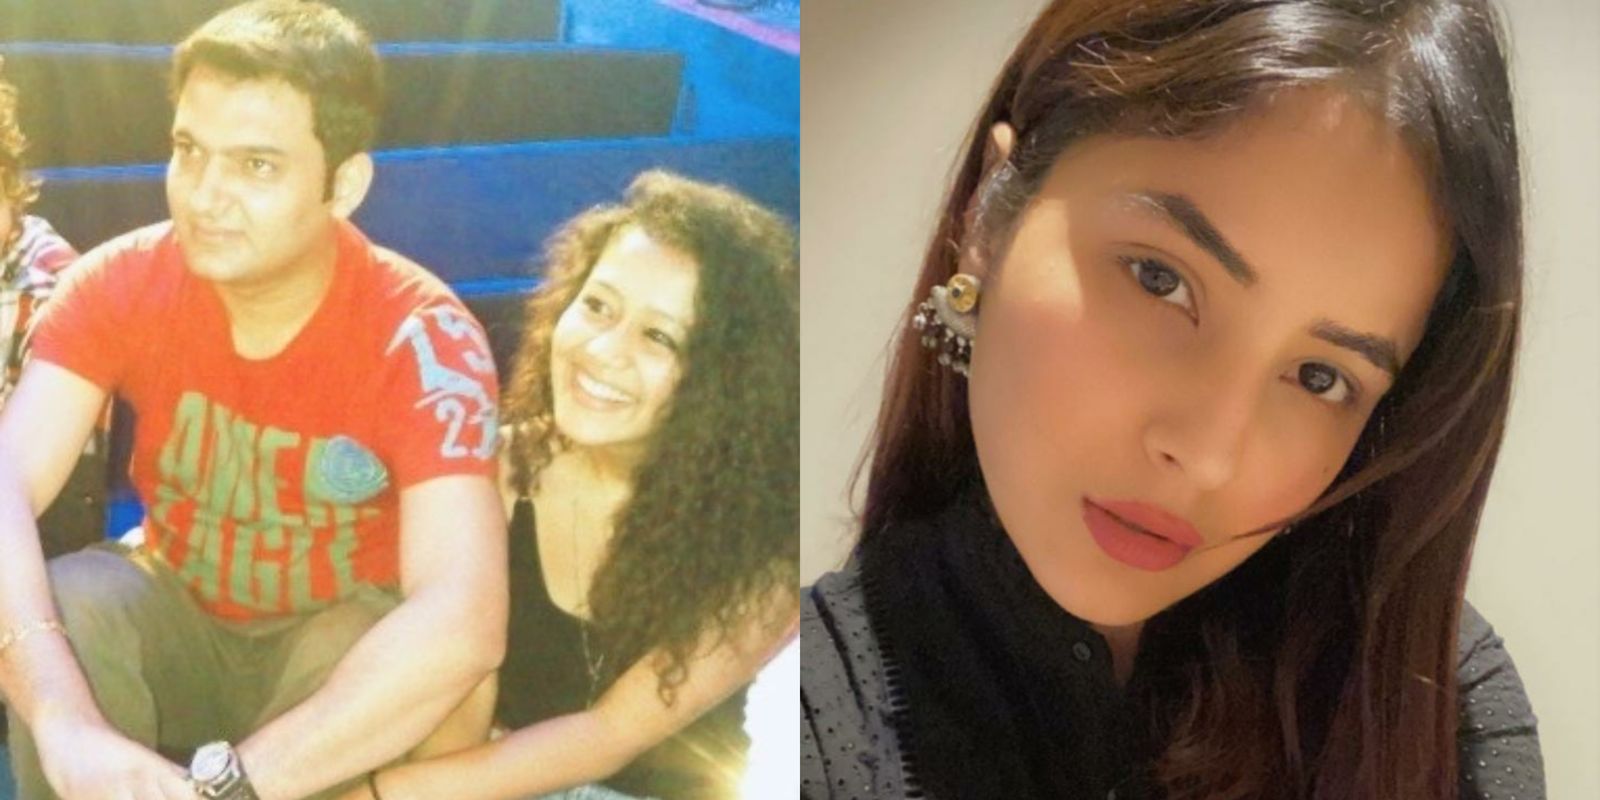 Kapil Sharma Shares A Cute Throwback Pic With Neha Kakkar; Shehnaaz Gill’s Gorgeous Selfies Leave Fans In Awe